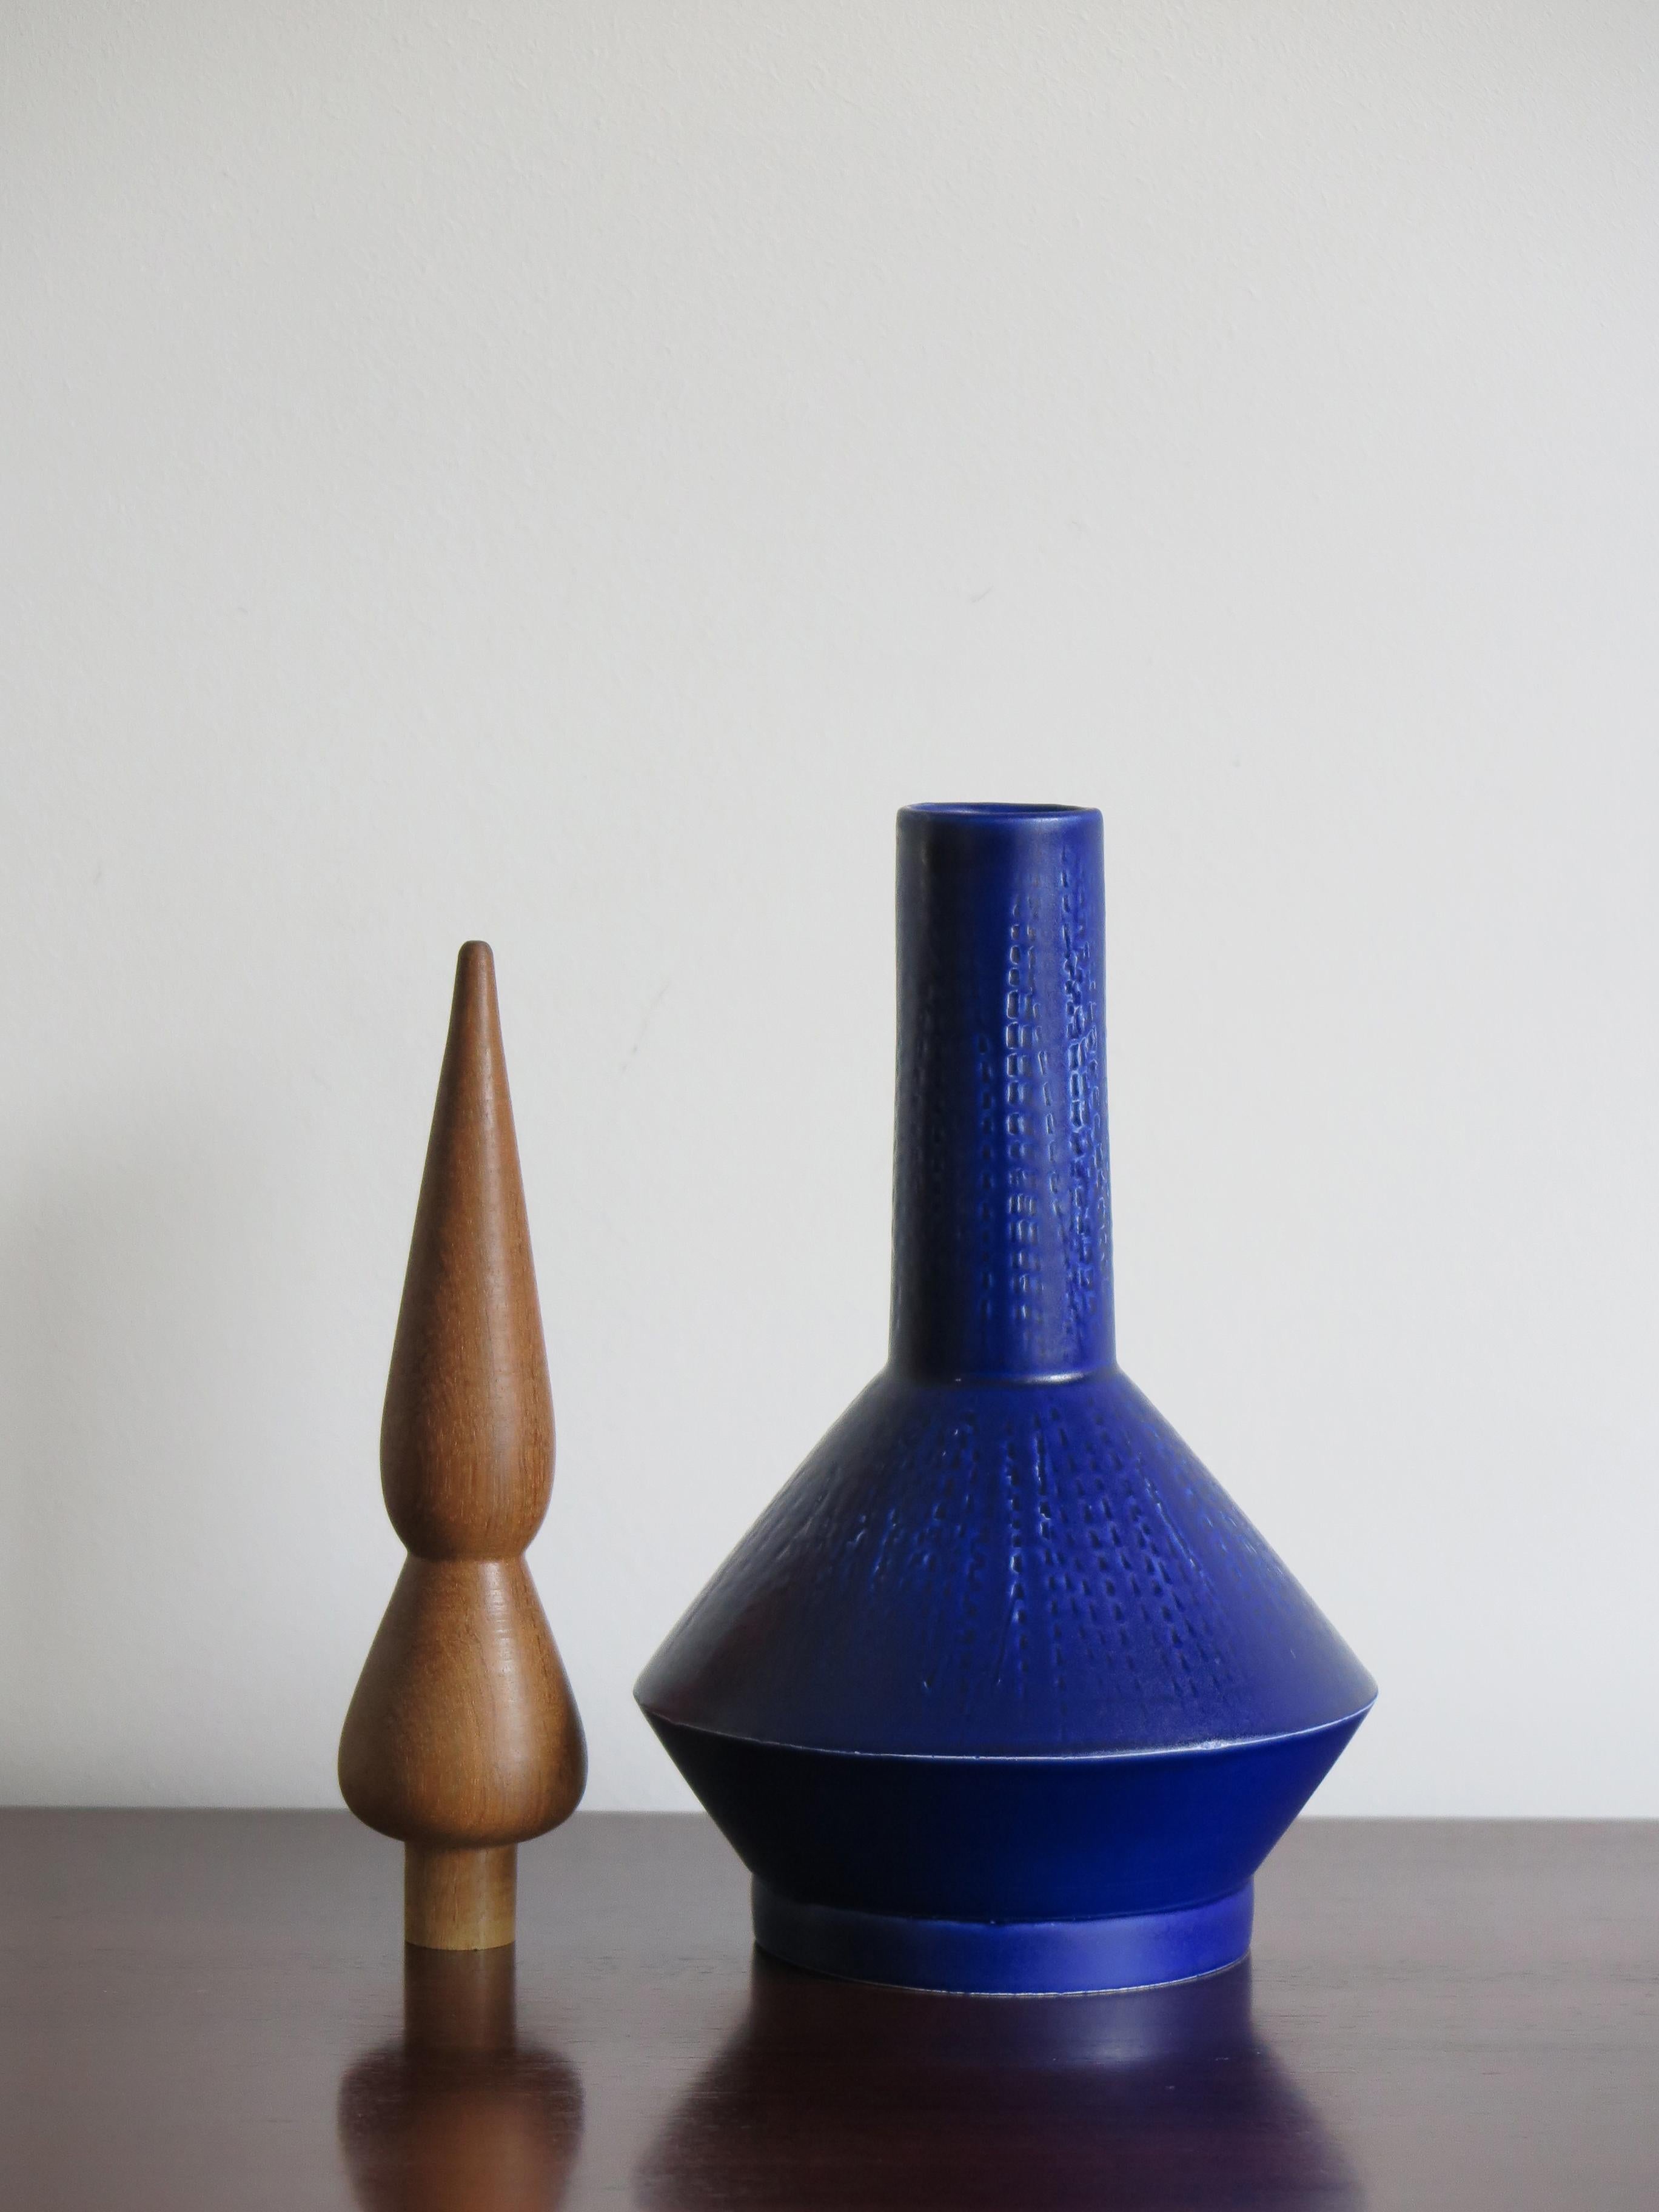 Italian Contemporary Blue Green Ceramic Vases Designed by Capperidicasa, Made in Italy For Sale